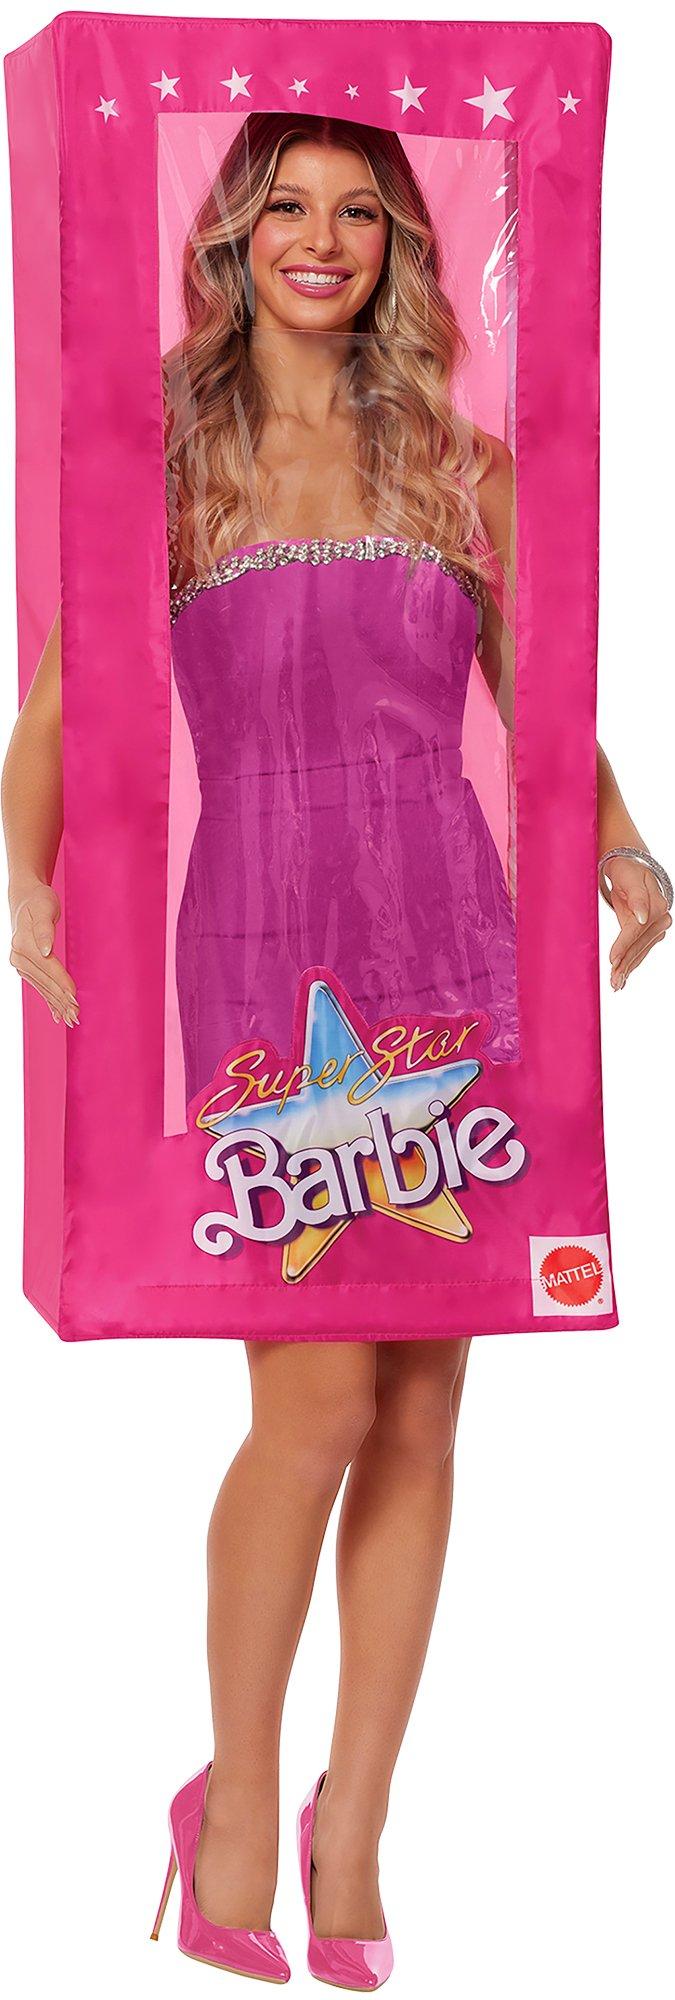 Barbie Clothes, Deluxe Bag with Outfit and Themed Accessories - Assorted*